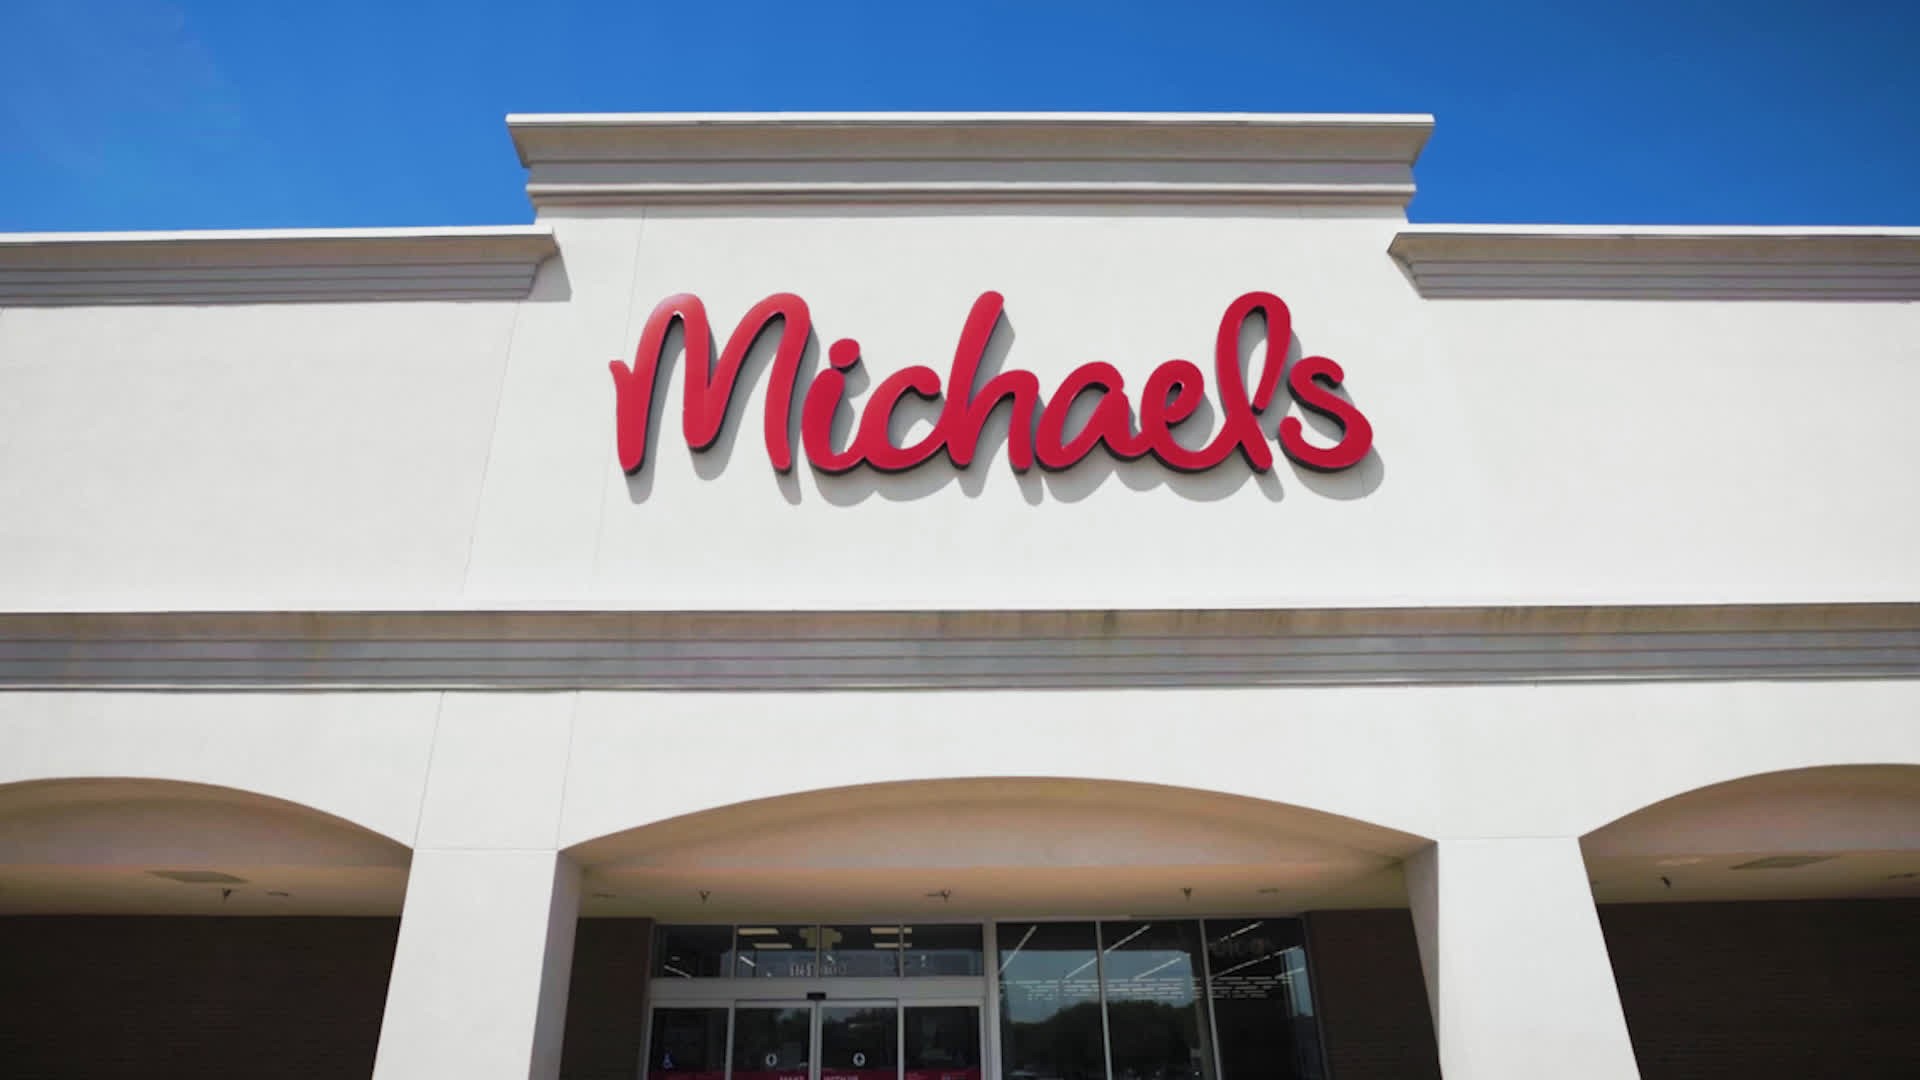 MICHAELS: A BUSINESS TRANSFORMATION FOR THE MAKERS